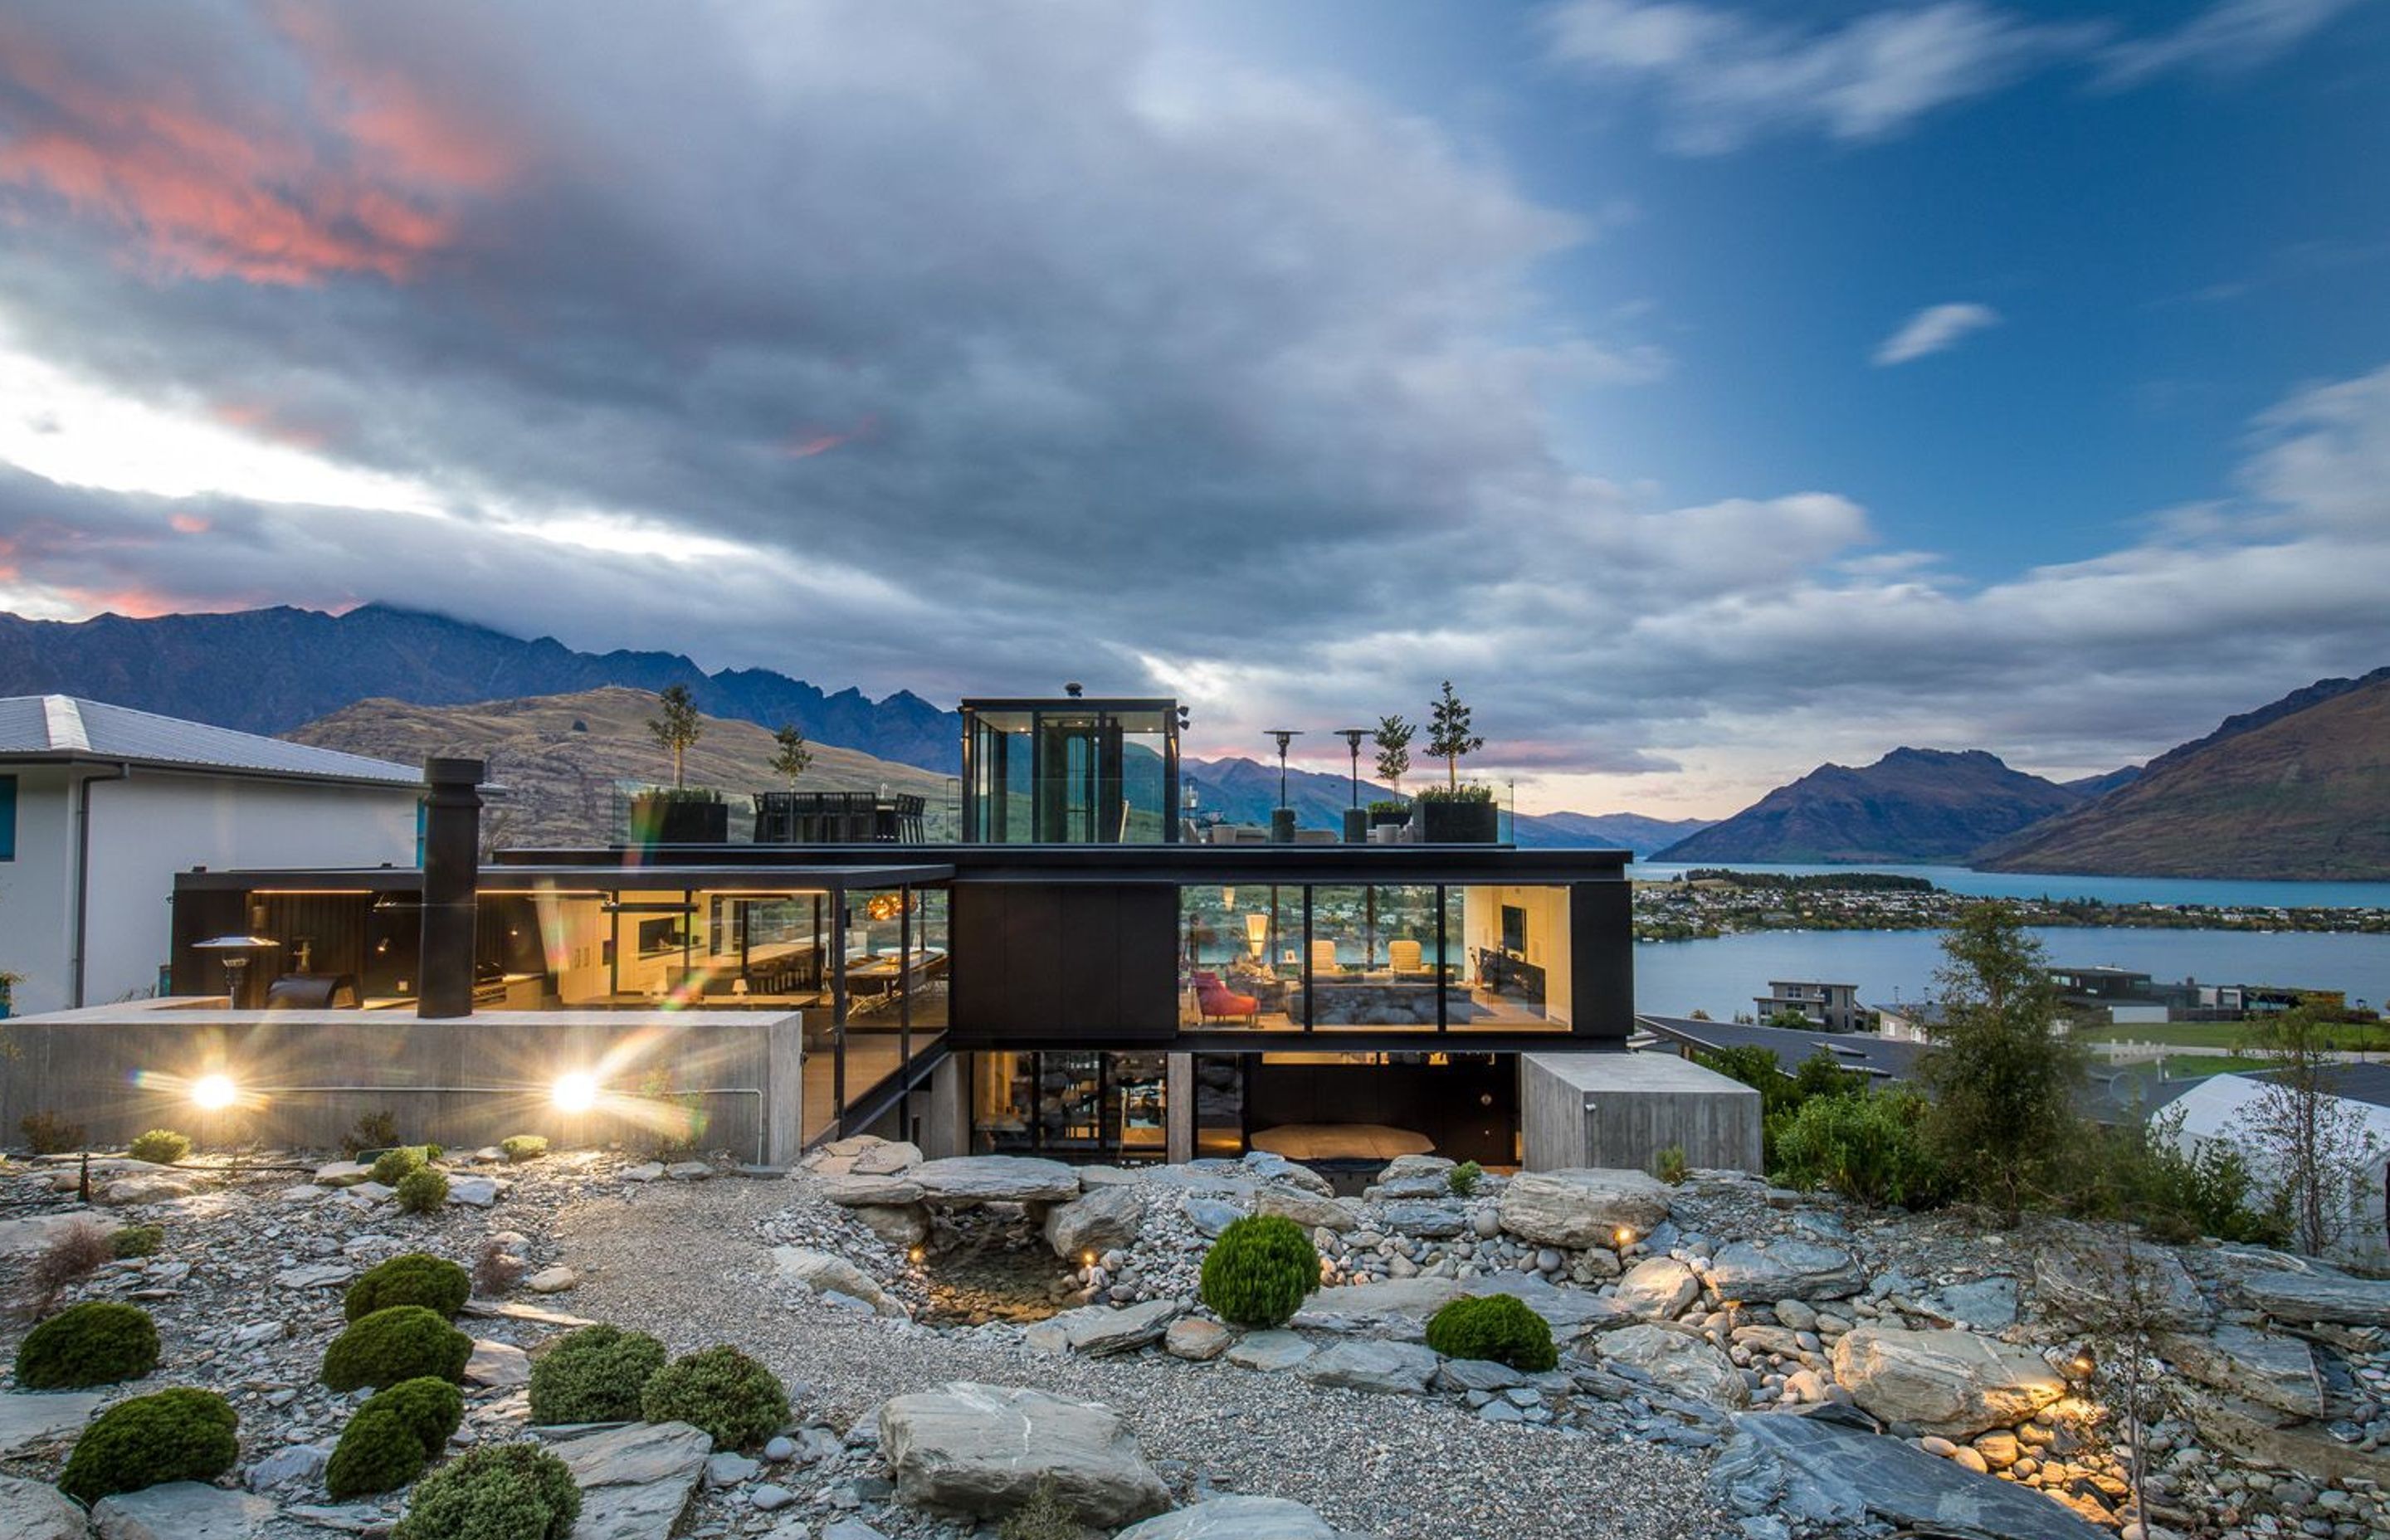 The north-facing elevation of Cascata House seen in context to Lake Wakatipu and the surrounding mountains, viewed from the rockery garden and stream.